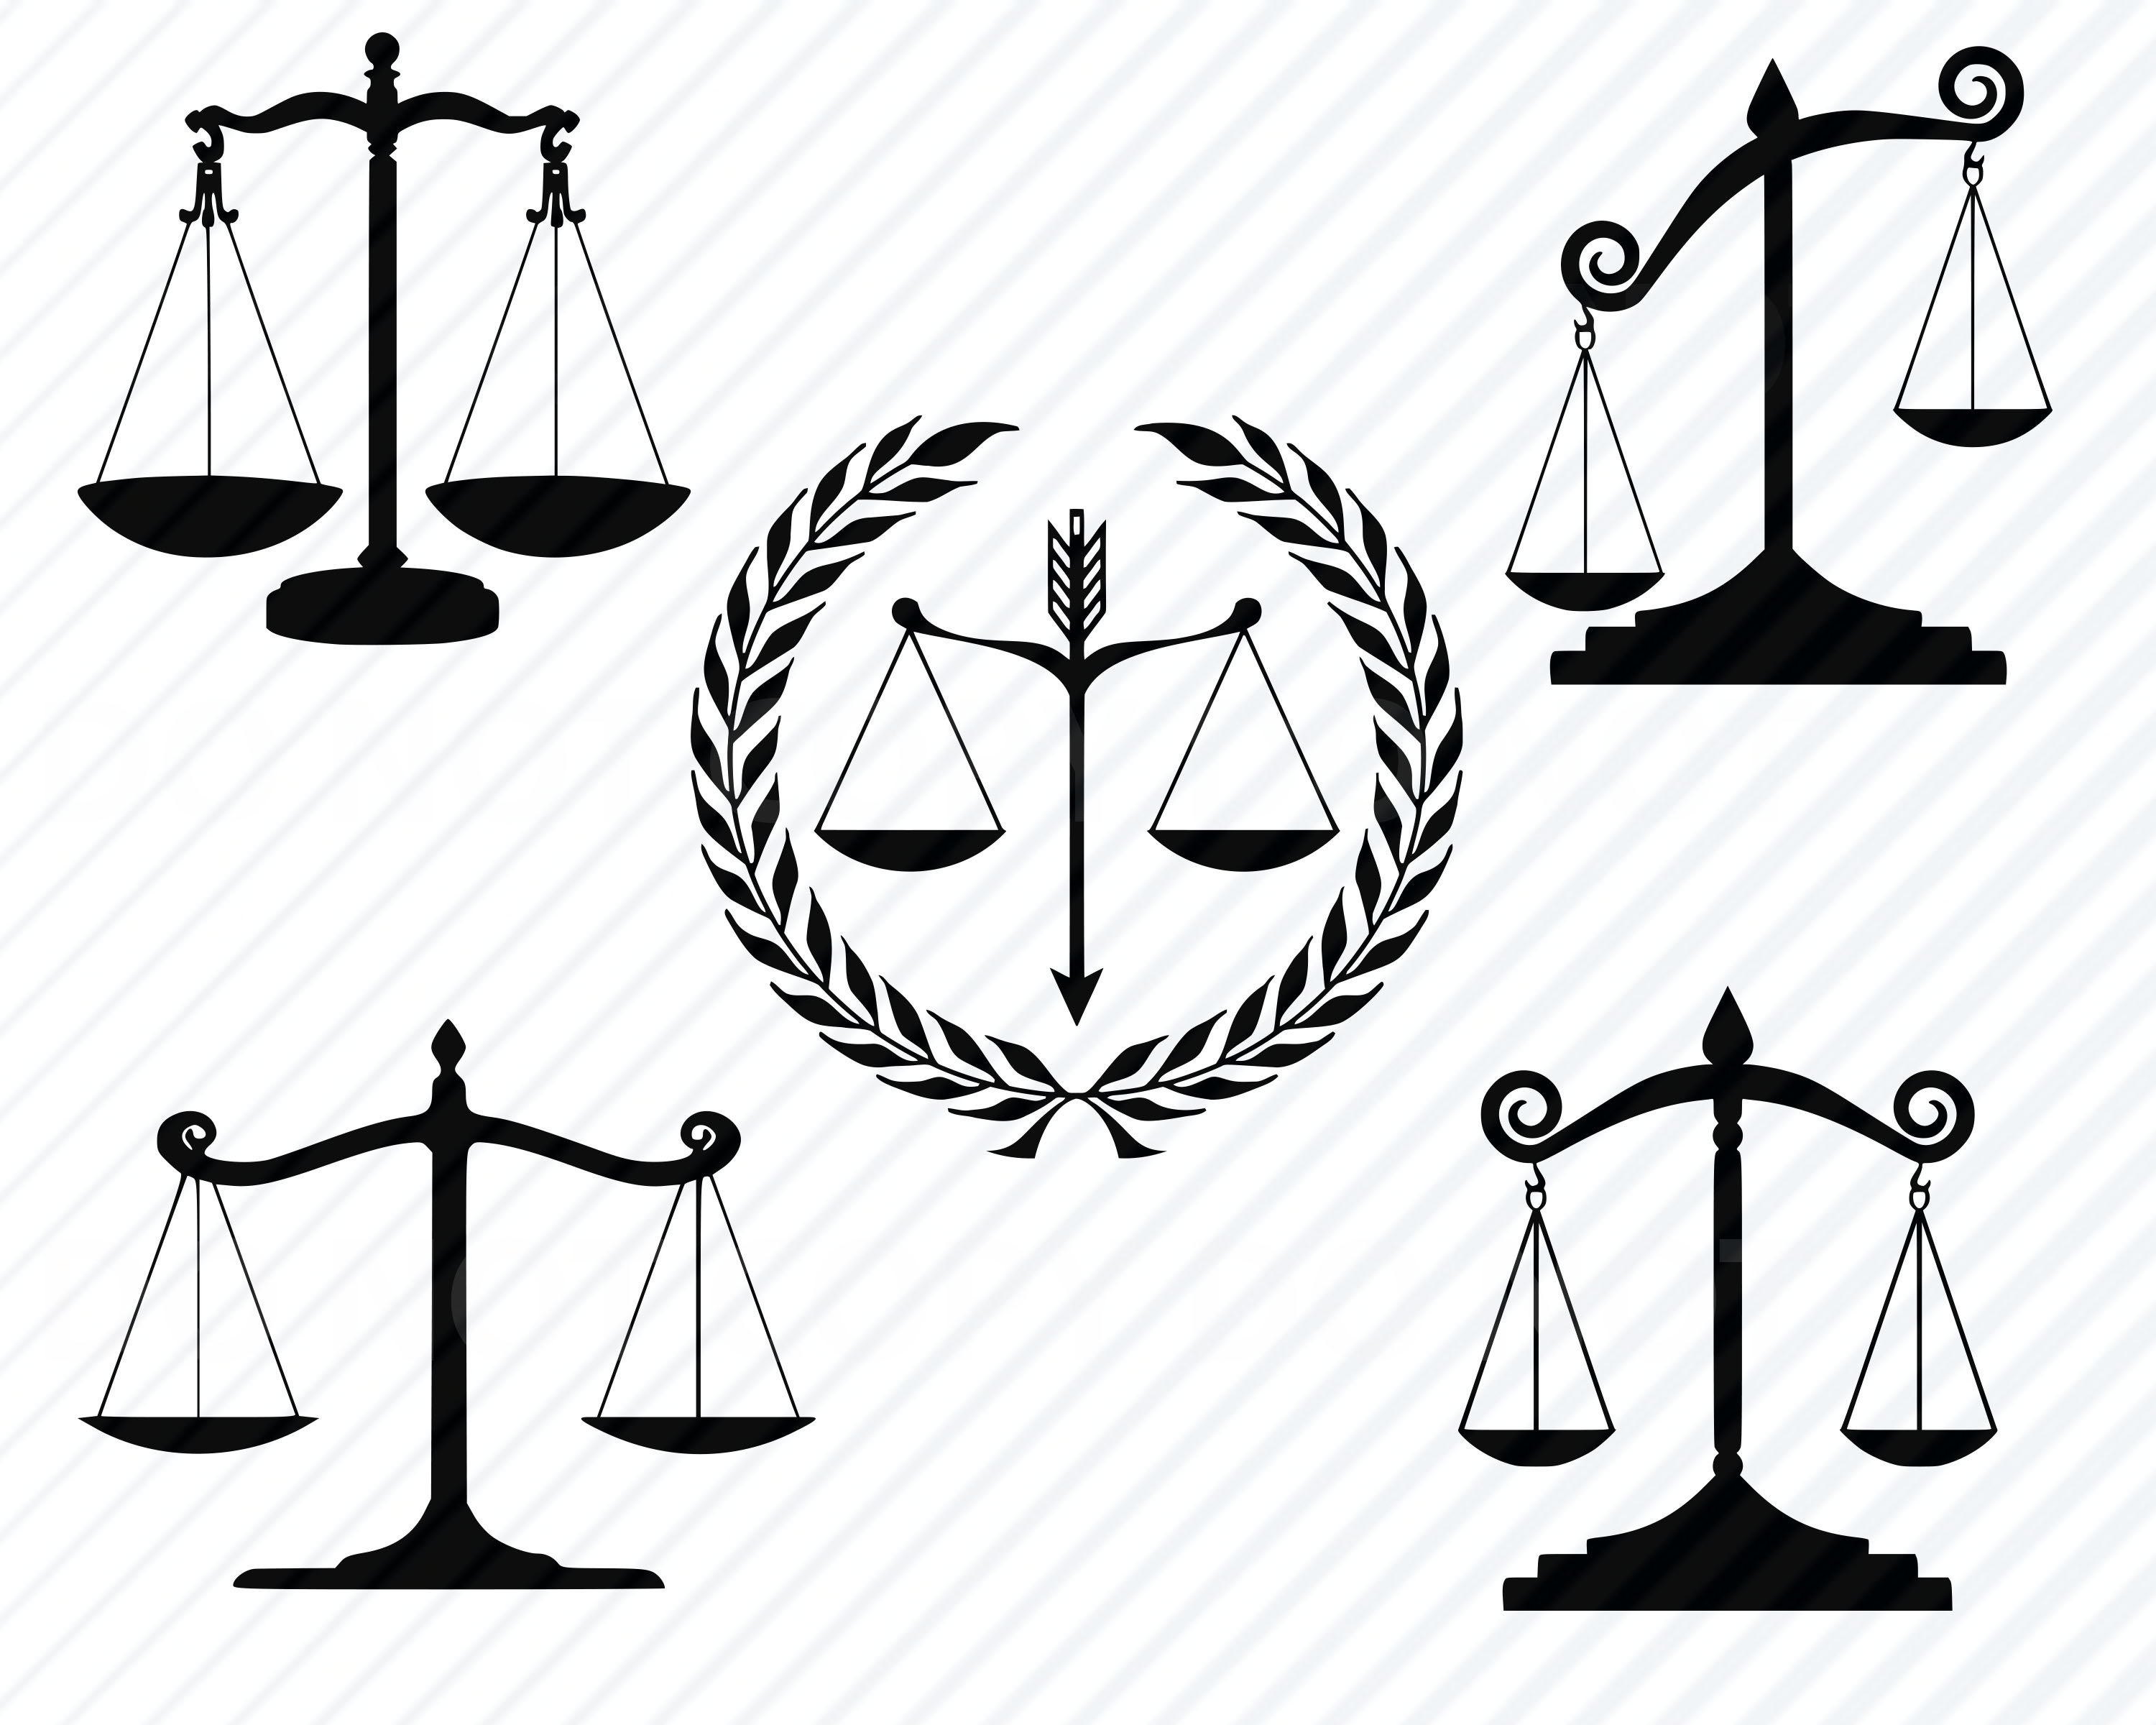 Libra Justice Scale. Files prepared for Cricut. SVG Clip Art. Digital file  available for instant download (eps, svg, pdf, dxf, png, jpeg)